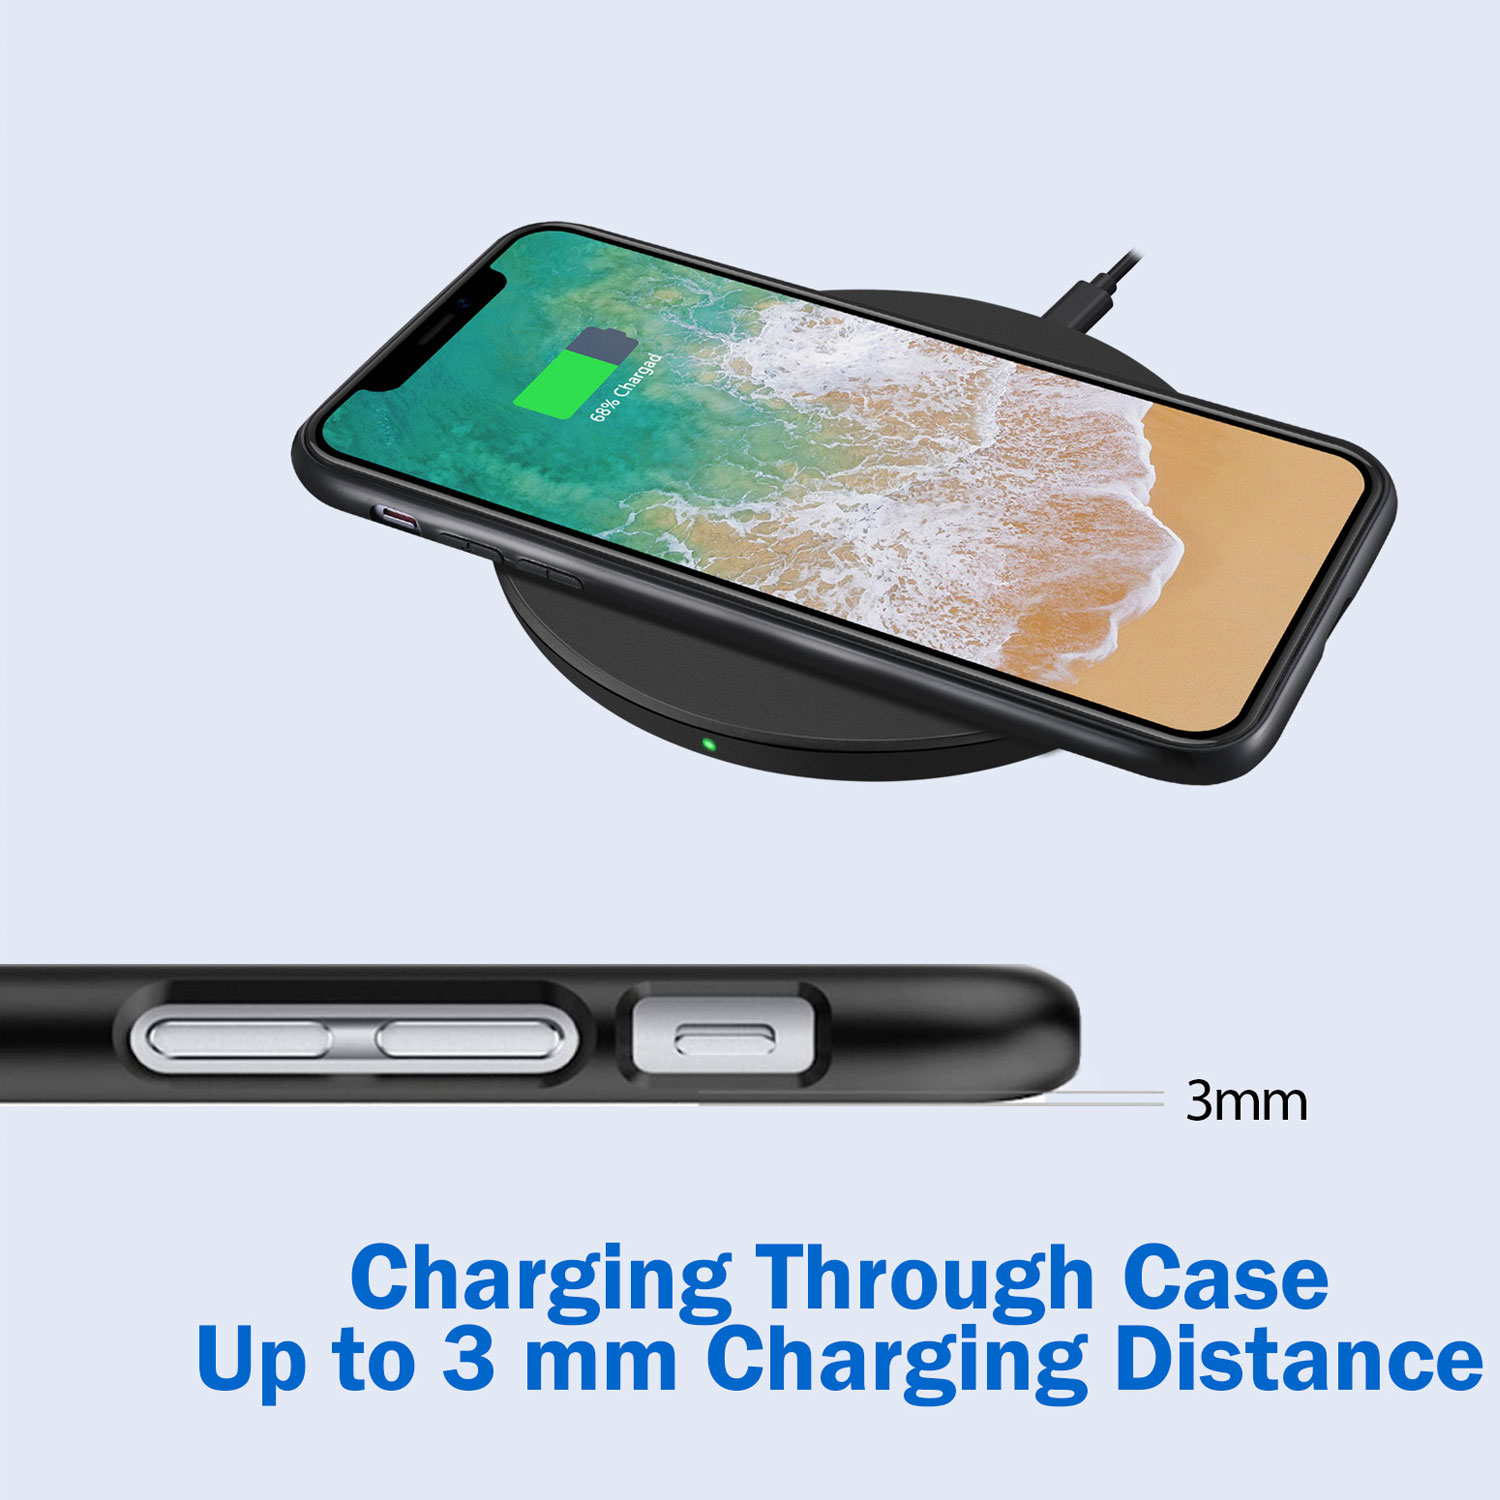 Max Qi-Certified Disc-Style Wireless Charger 10W